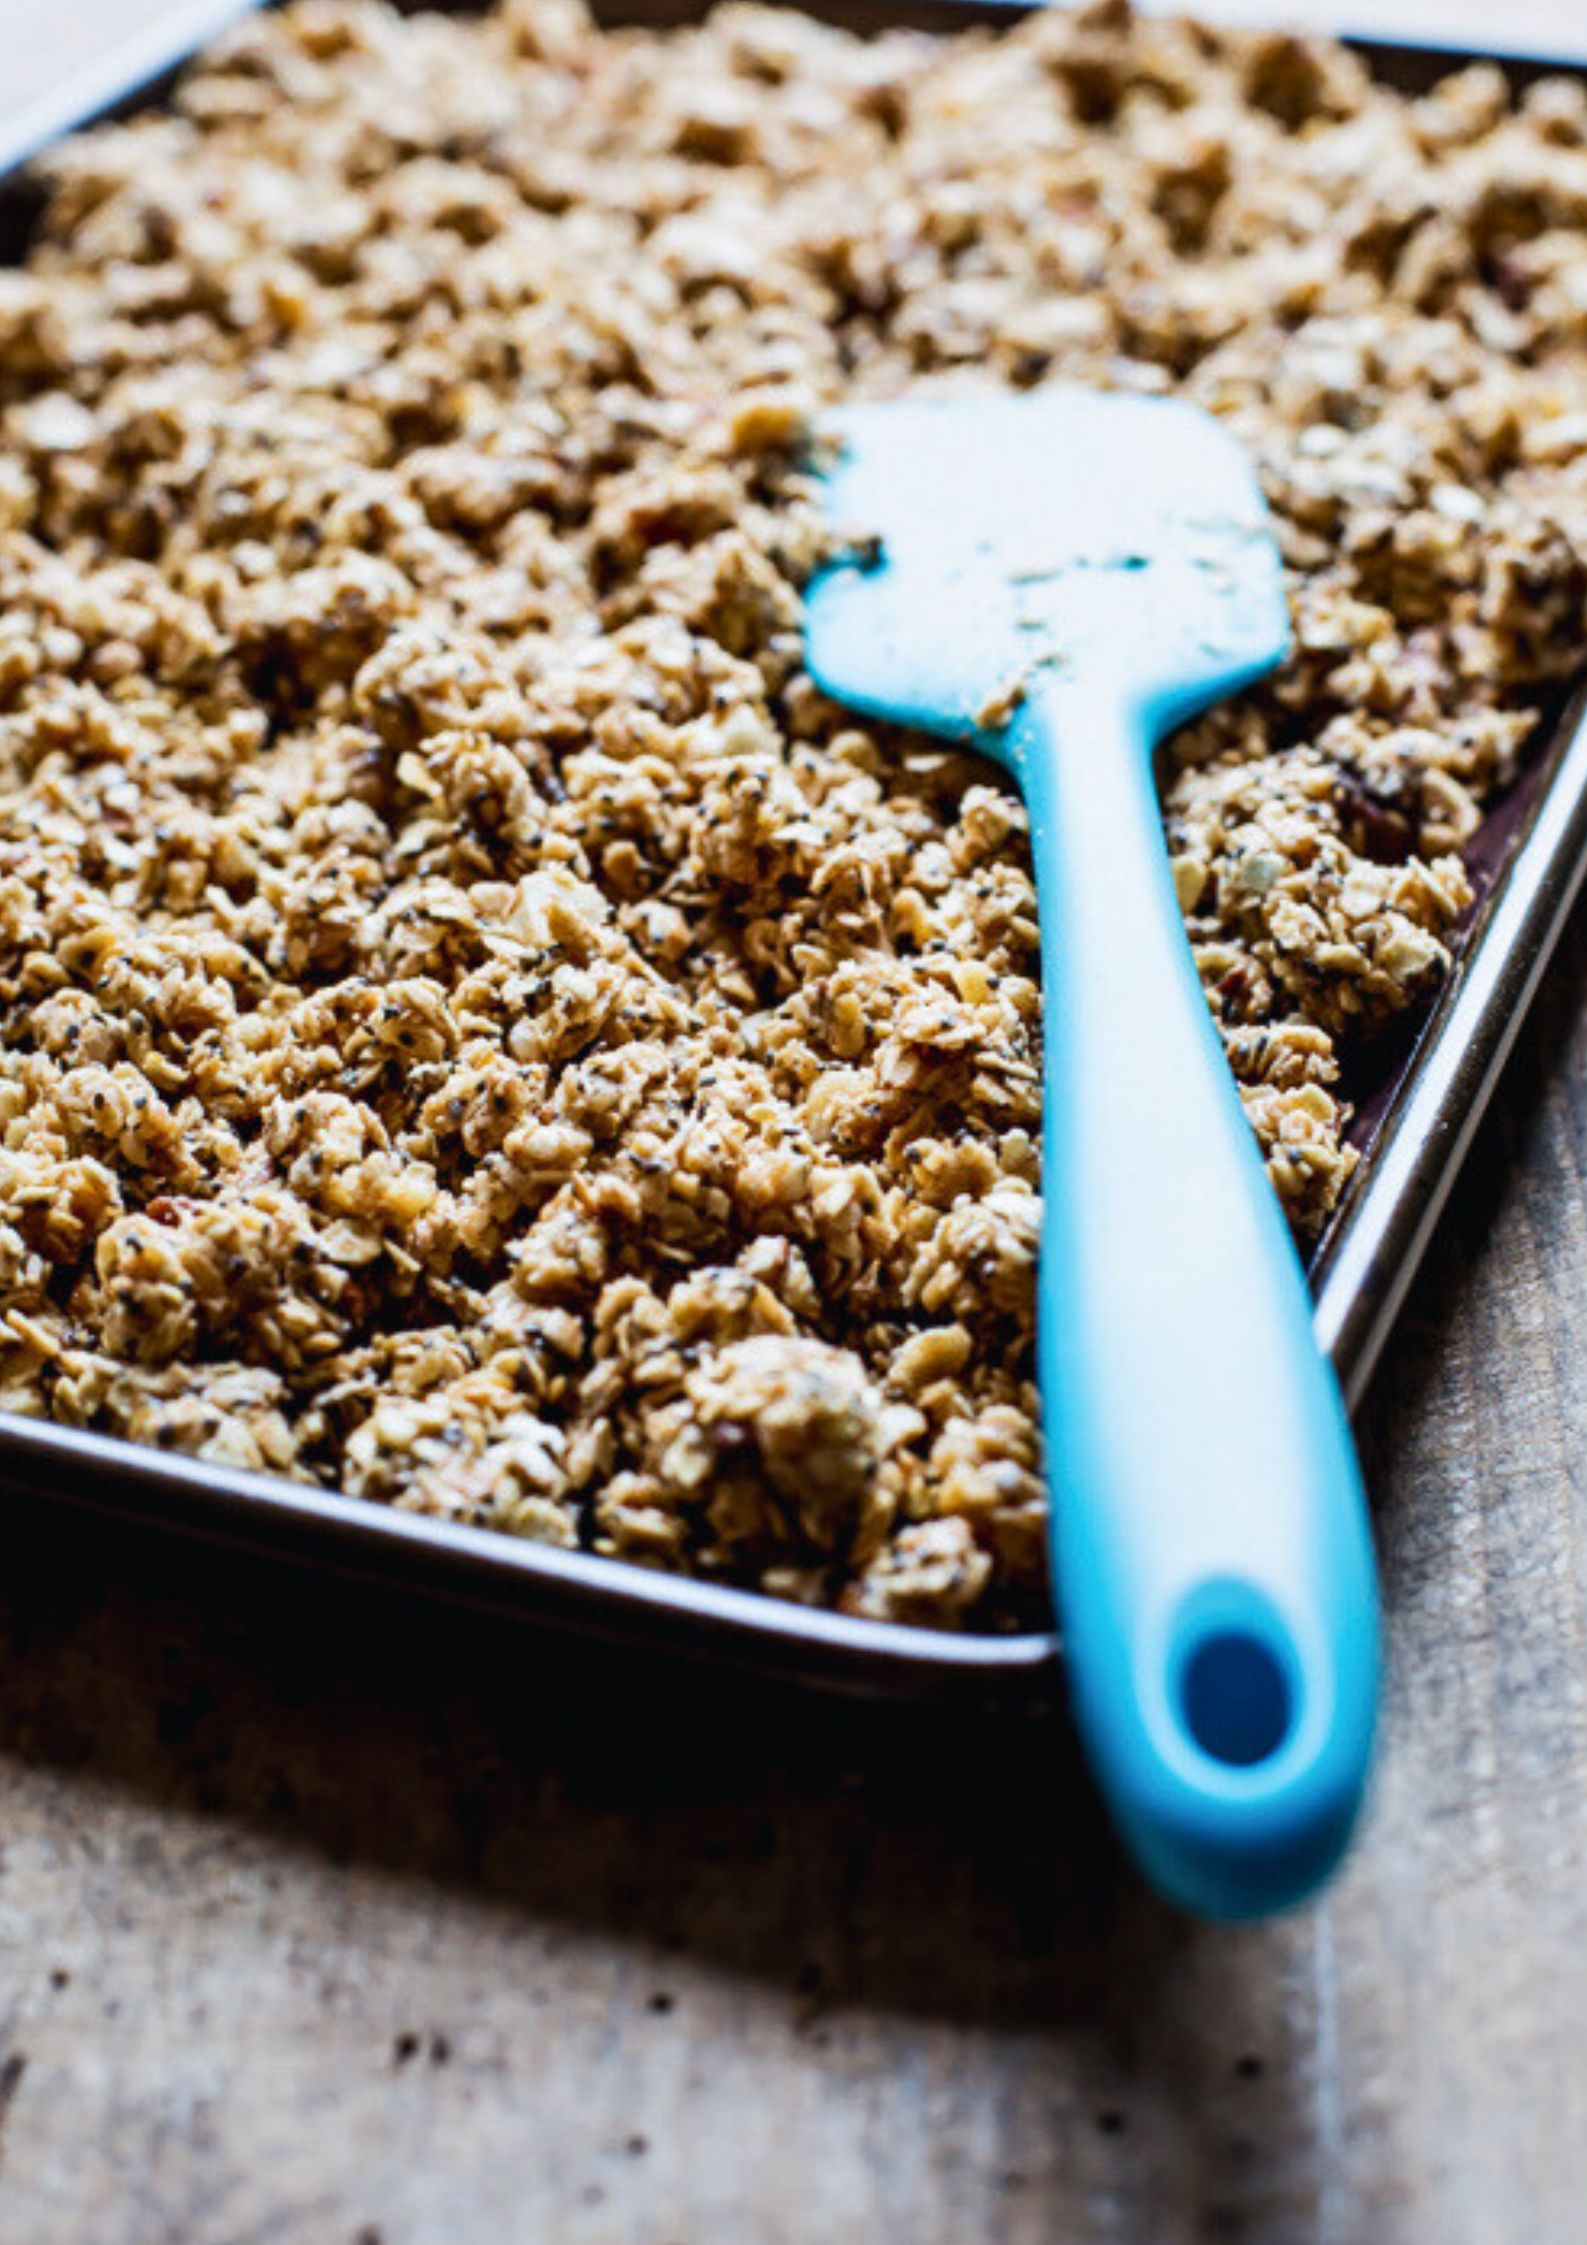 This healthy homemade granola made with chopped nuts, peanut butter and dark chocolate chips is the perfect make ahead breakfast or quick snack! Sugar free and gluten free too! Recipe on thecookandhim.com | #granola #homemadegranola #healthygranola #sugarfreebreakfast